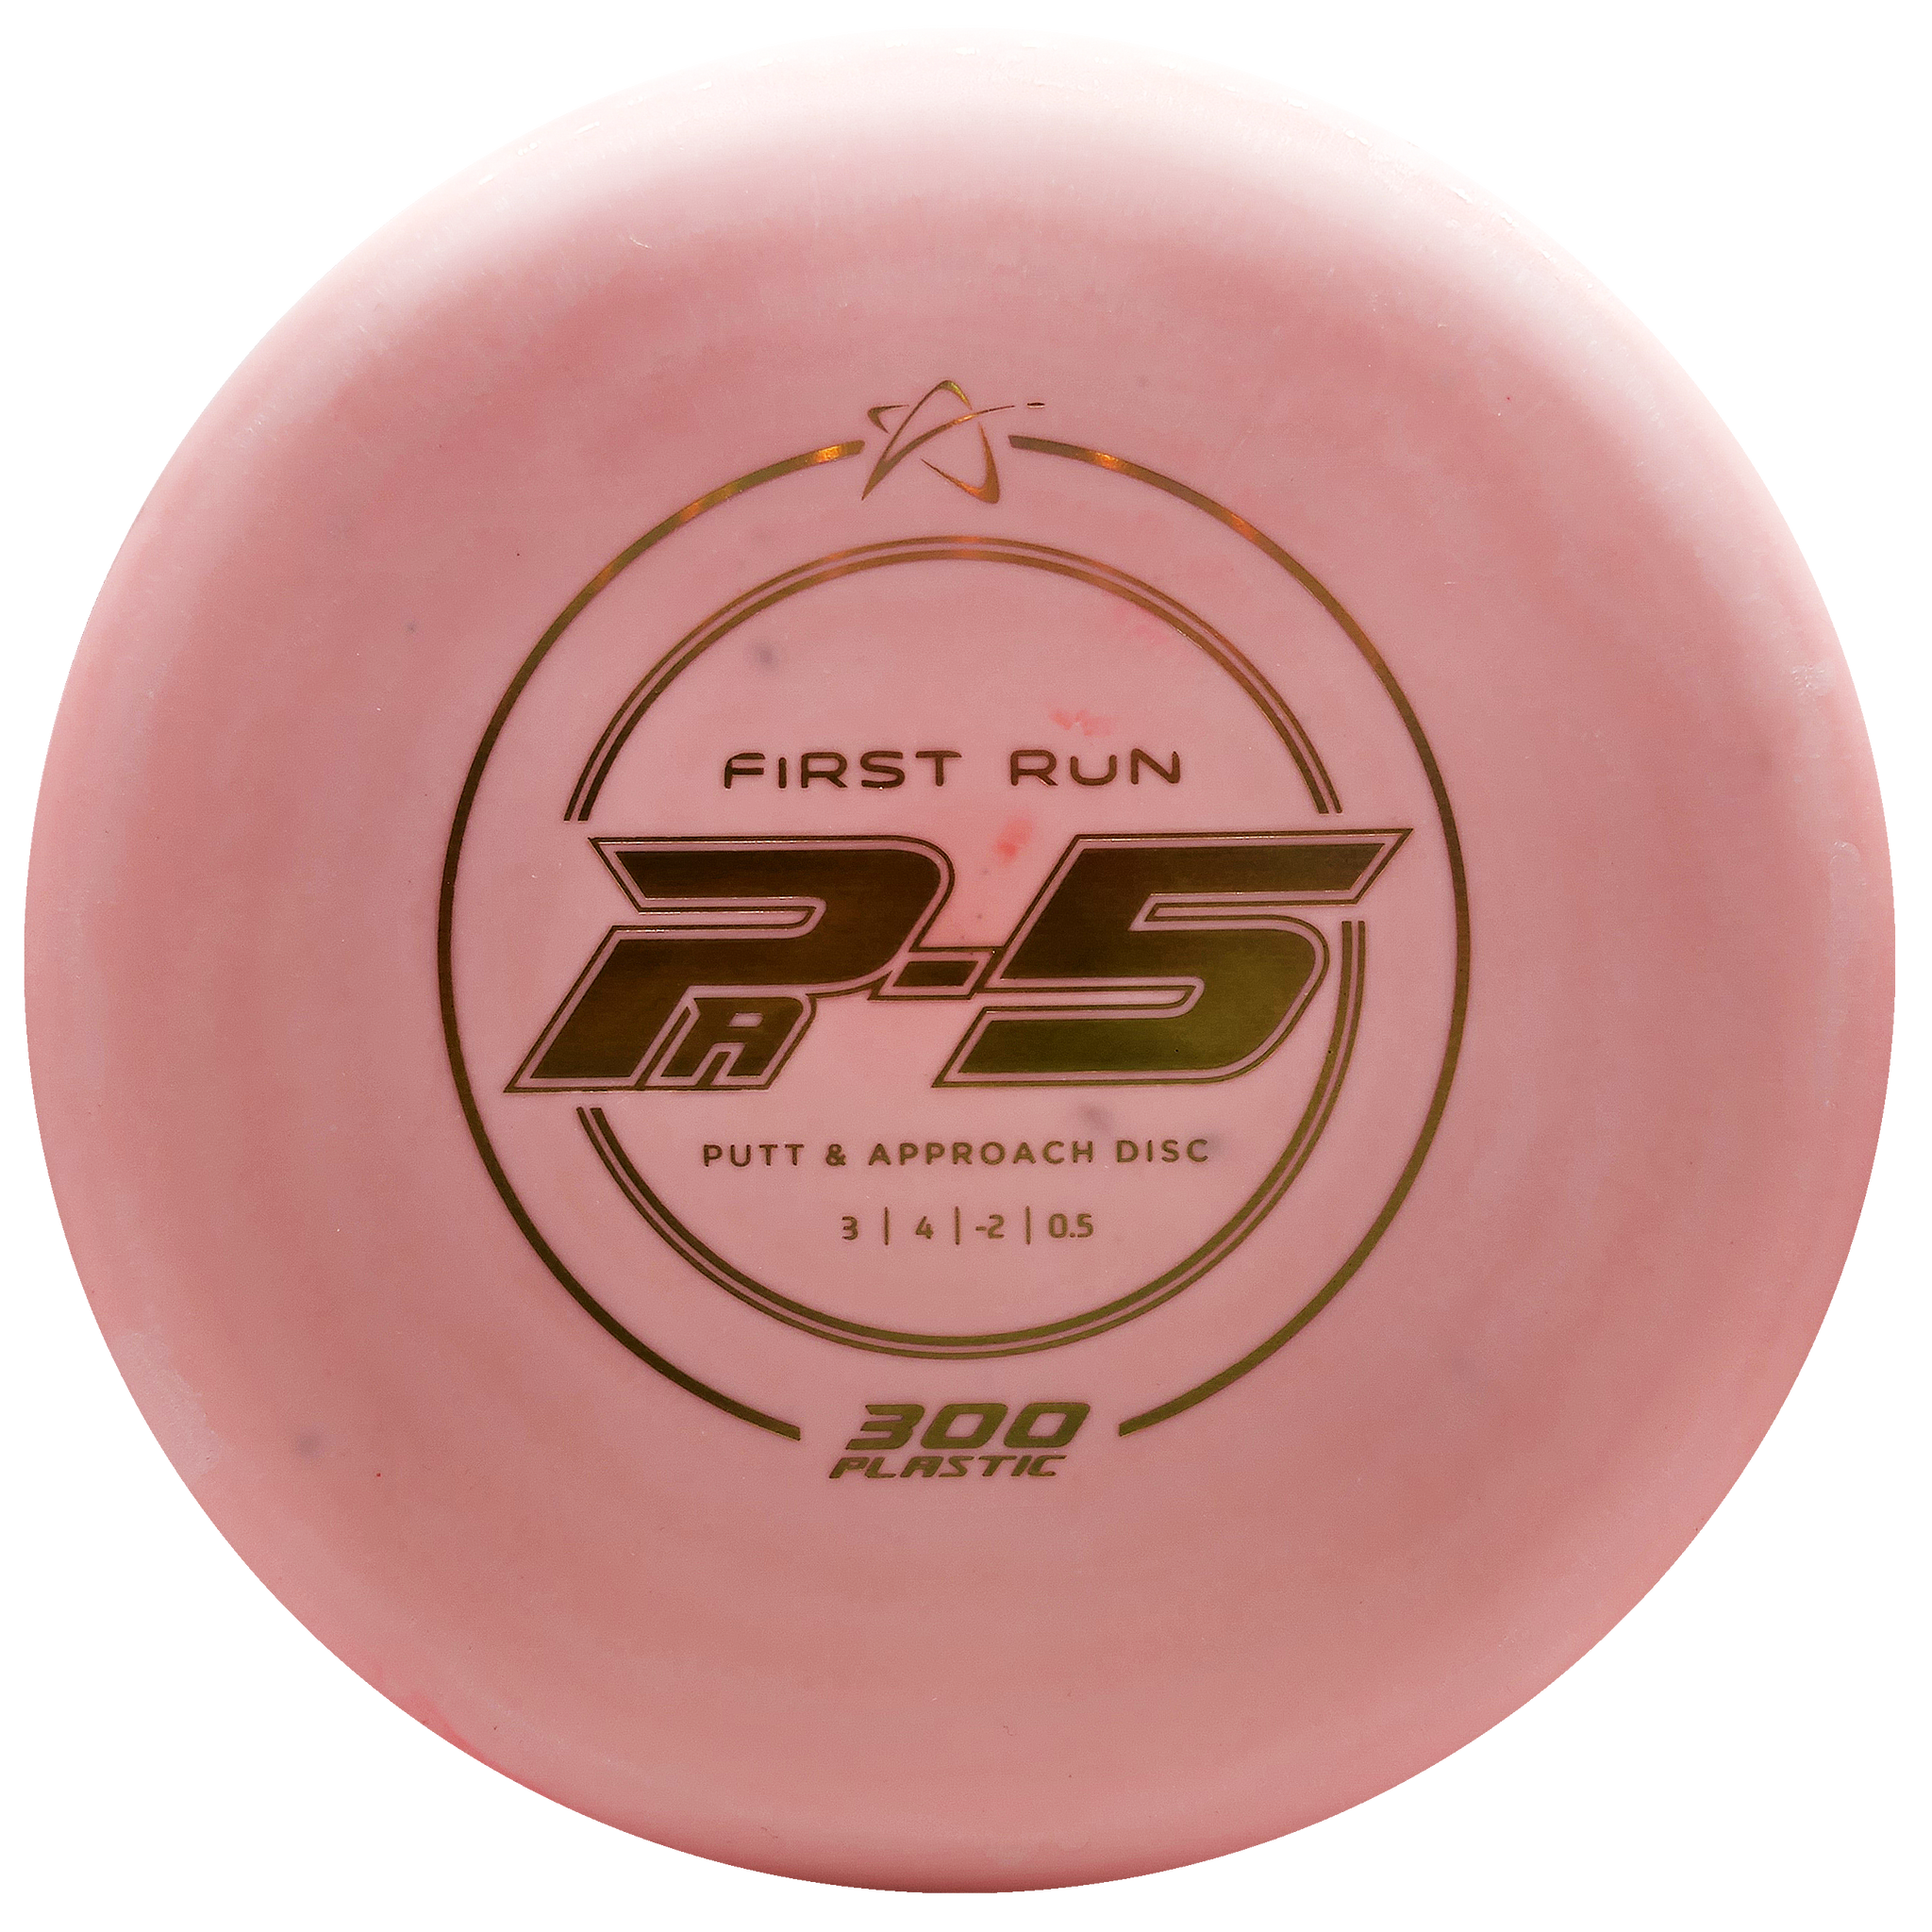 Prodigy: PA-5 Putt and Approach Disc - First Run Stamp - 300 Plastic - Light Pink/Gold